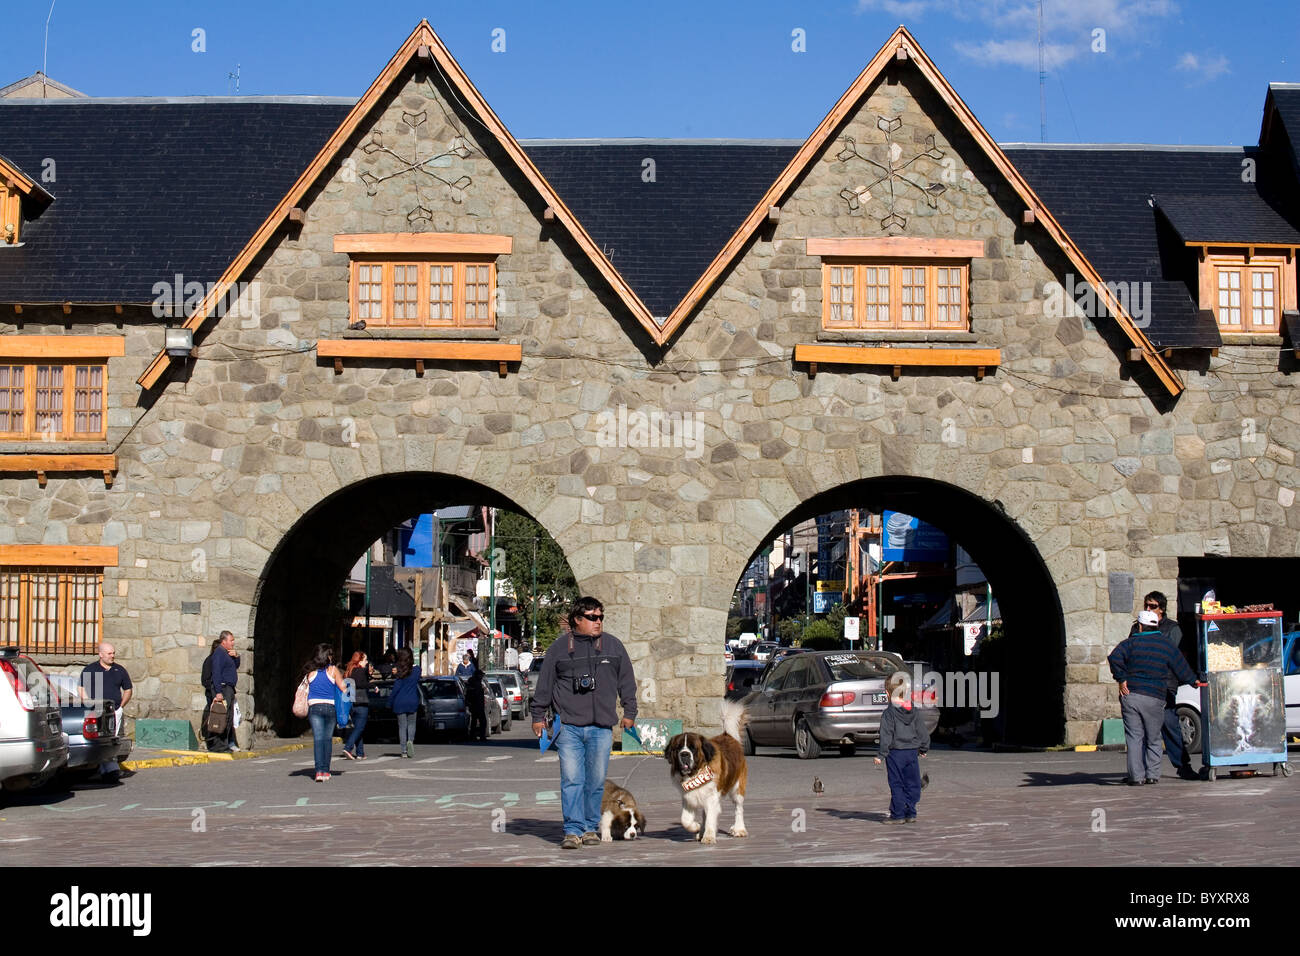 San Bernard dogs used as a touristic attraction in the main square of Bariloche, Patagonia, Argentina, South America Stock Photo